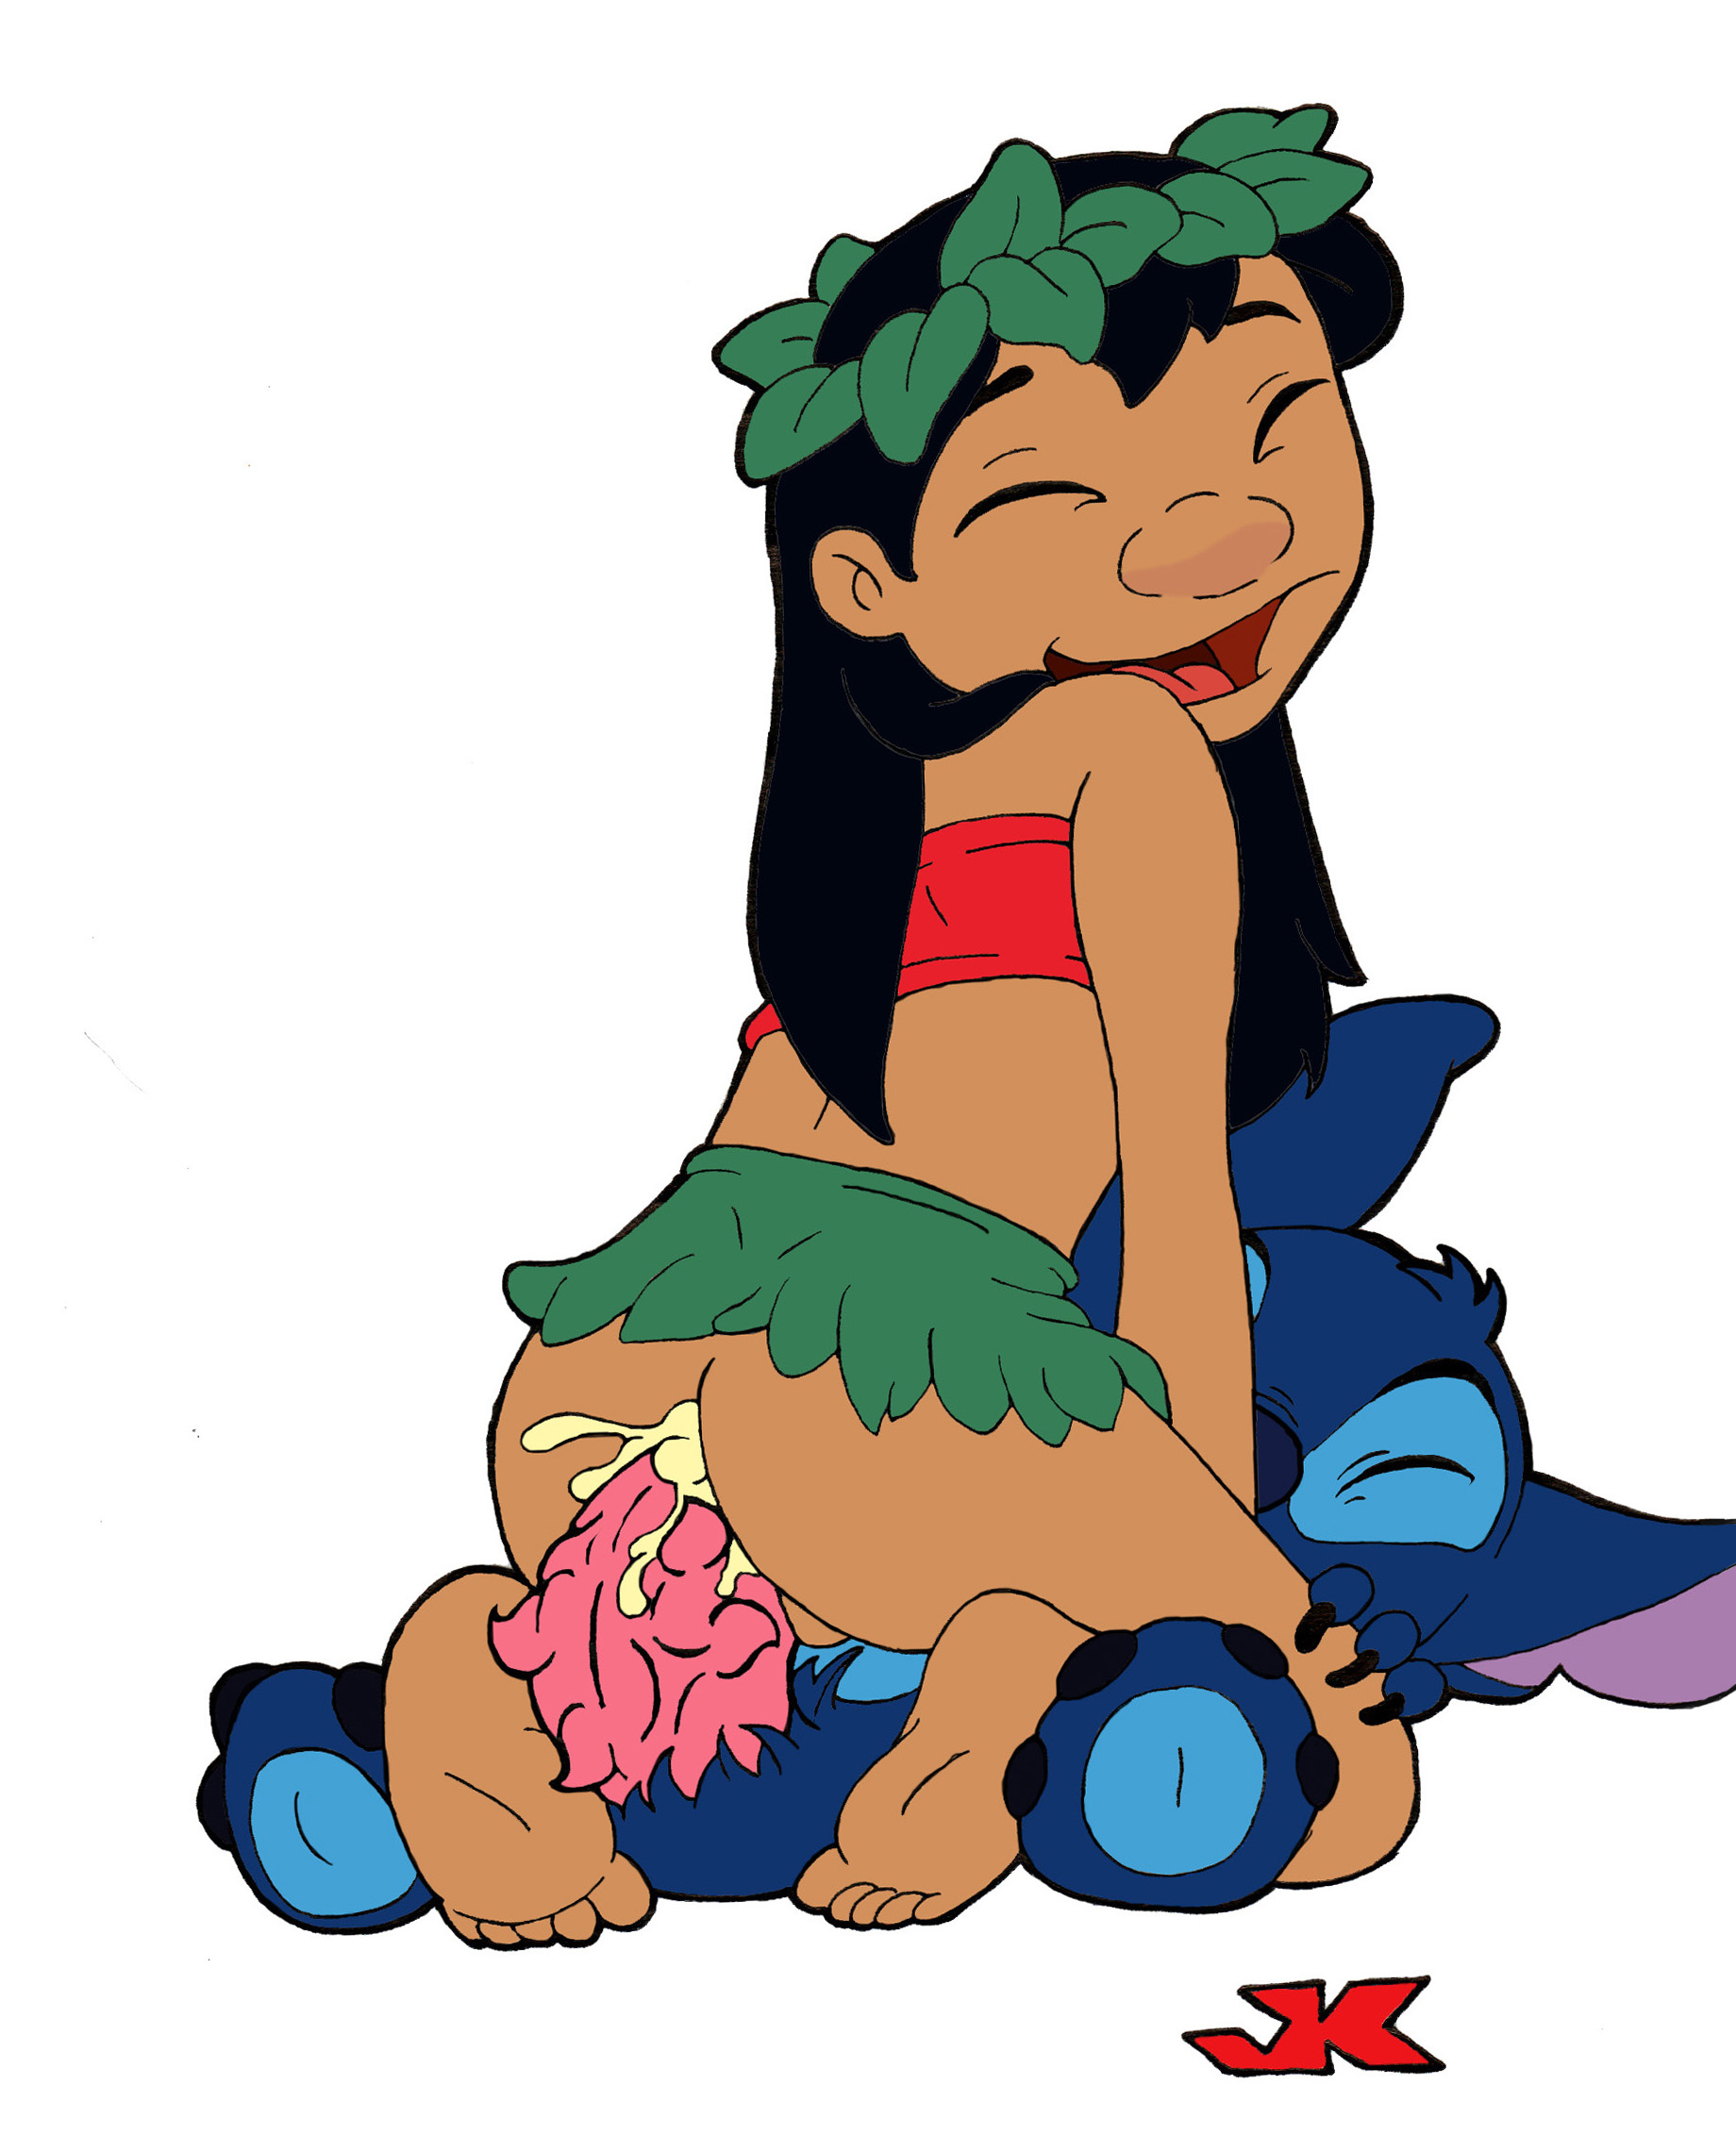 Sexy 93 naked picture Grown Up Lilo And Stitch Hentai, and y yuki e